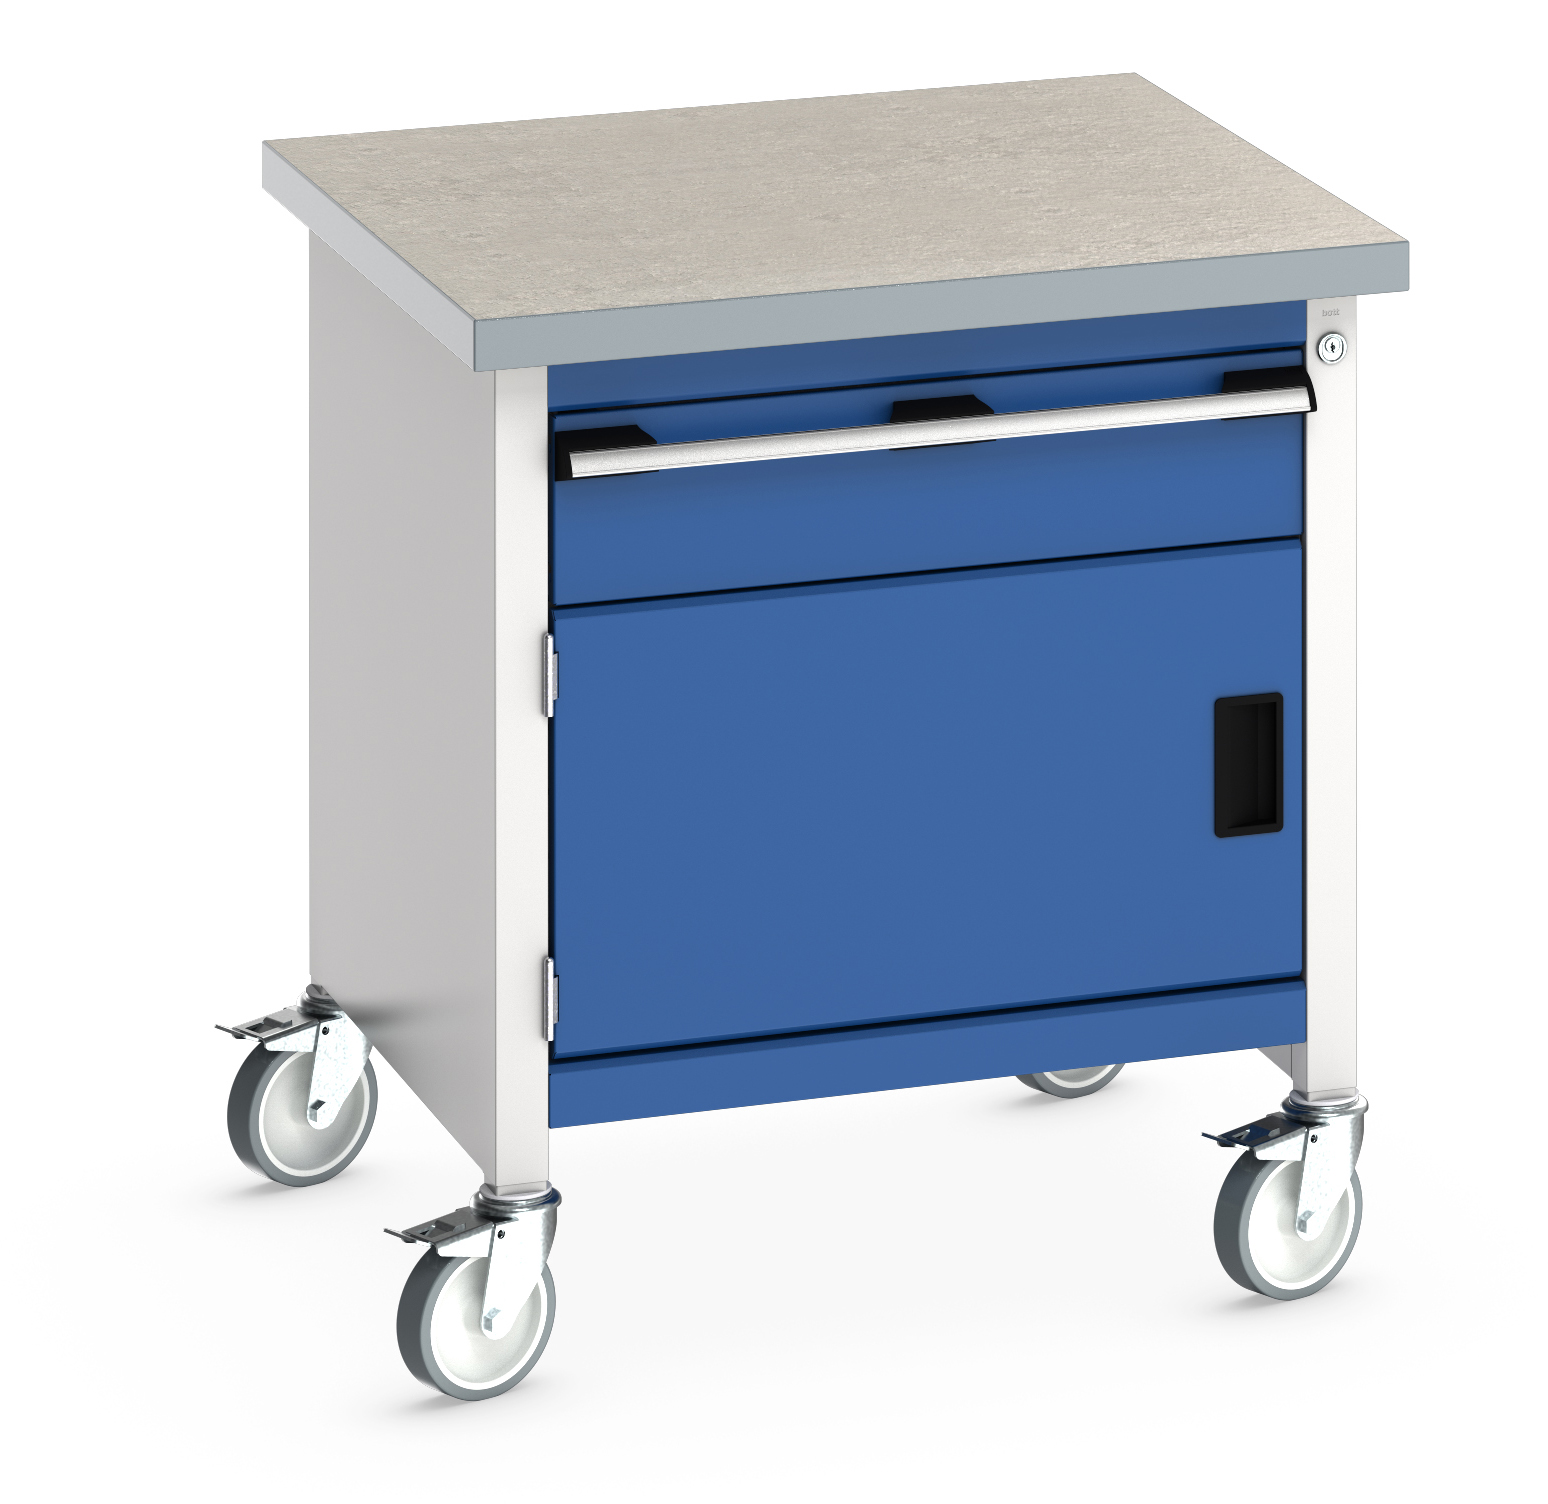 Bott Cubio Mobile Storage Bench With 1 Drawer - Full Cupboard - 41002090.11V